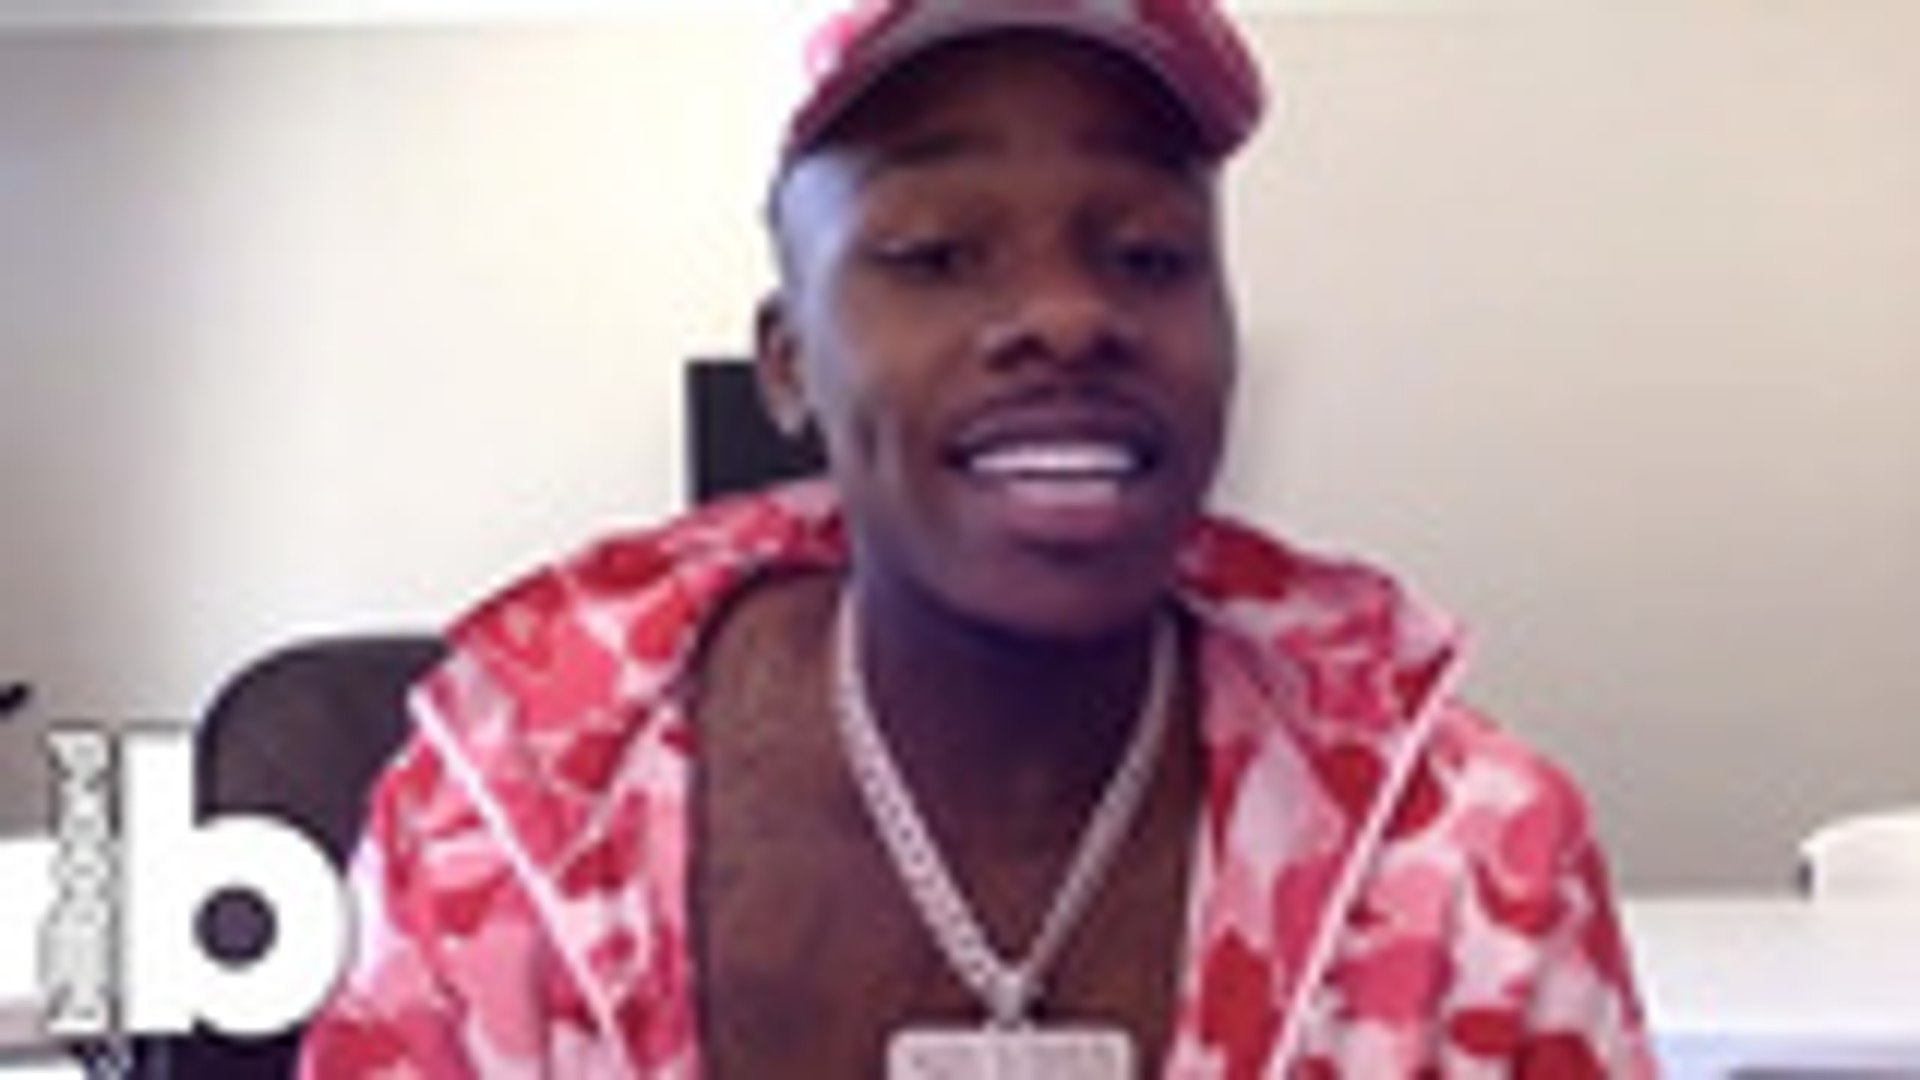 DaBaby Talks New Album ‘Blame It on Baby’, Working With NBA YoungBoy & Staying Creative During Q